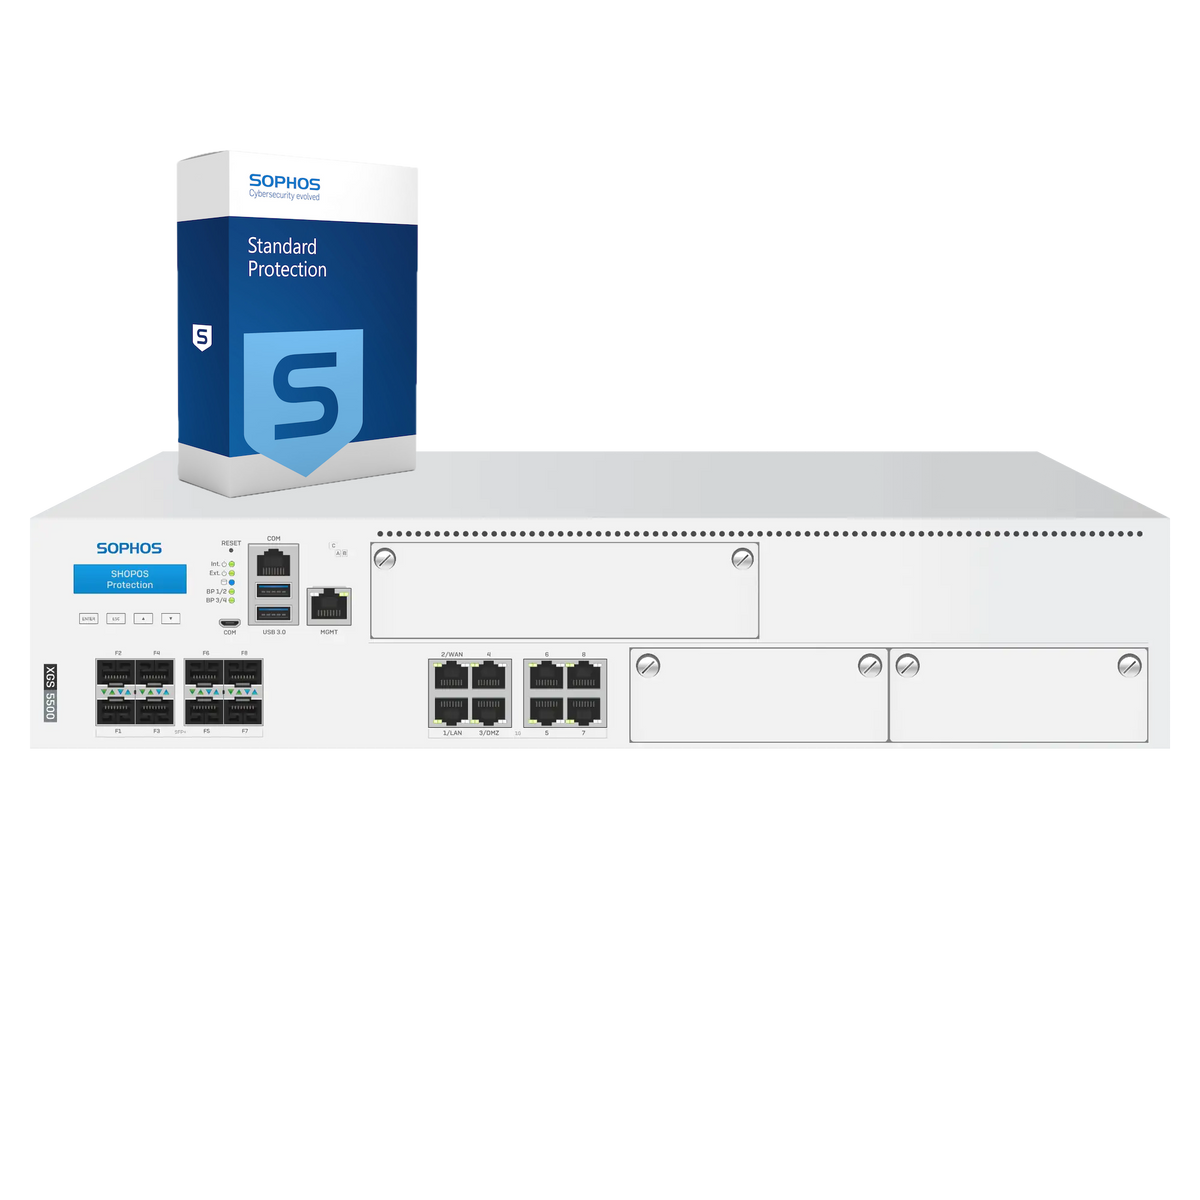 Sophos XGS 5500 Firewall with Standard Protection, 3-year - EU power cord